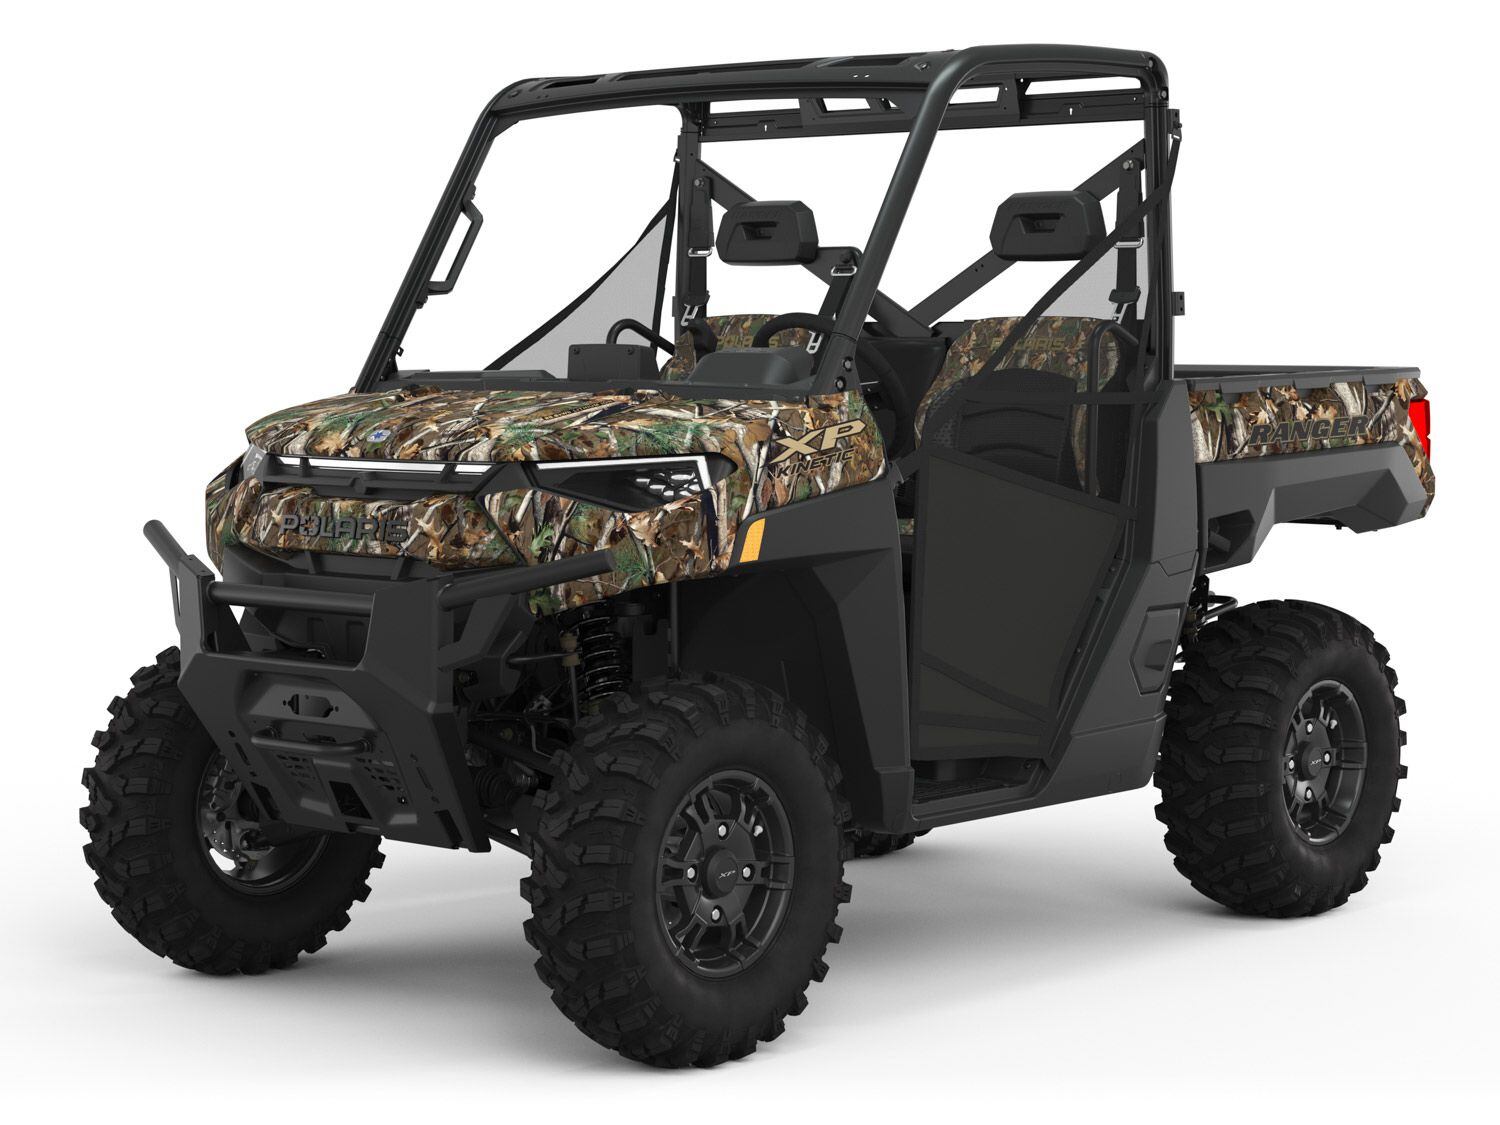 The 2023 Polaris Ranger Kinetic can be had in white or camo.